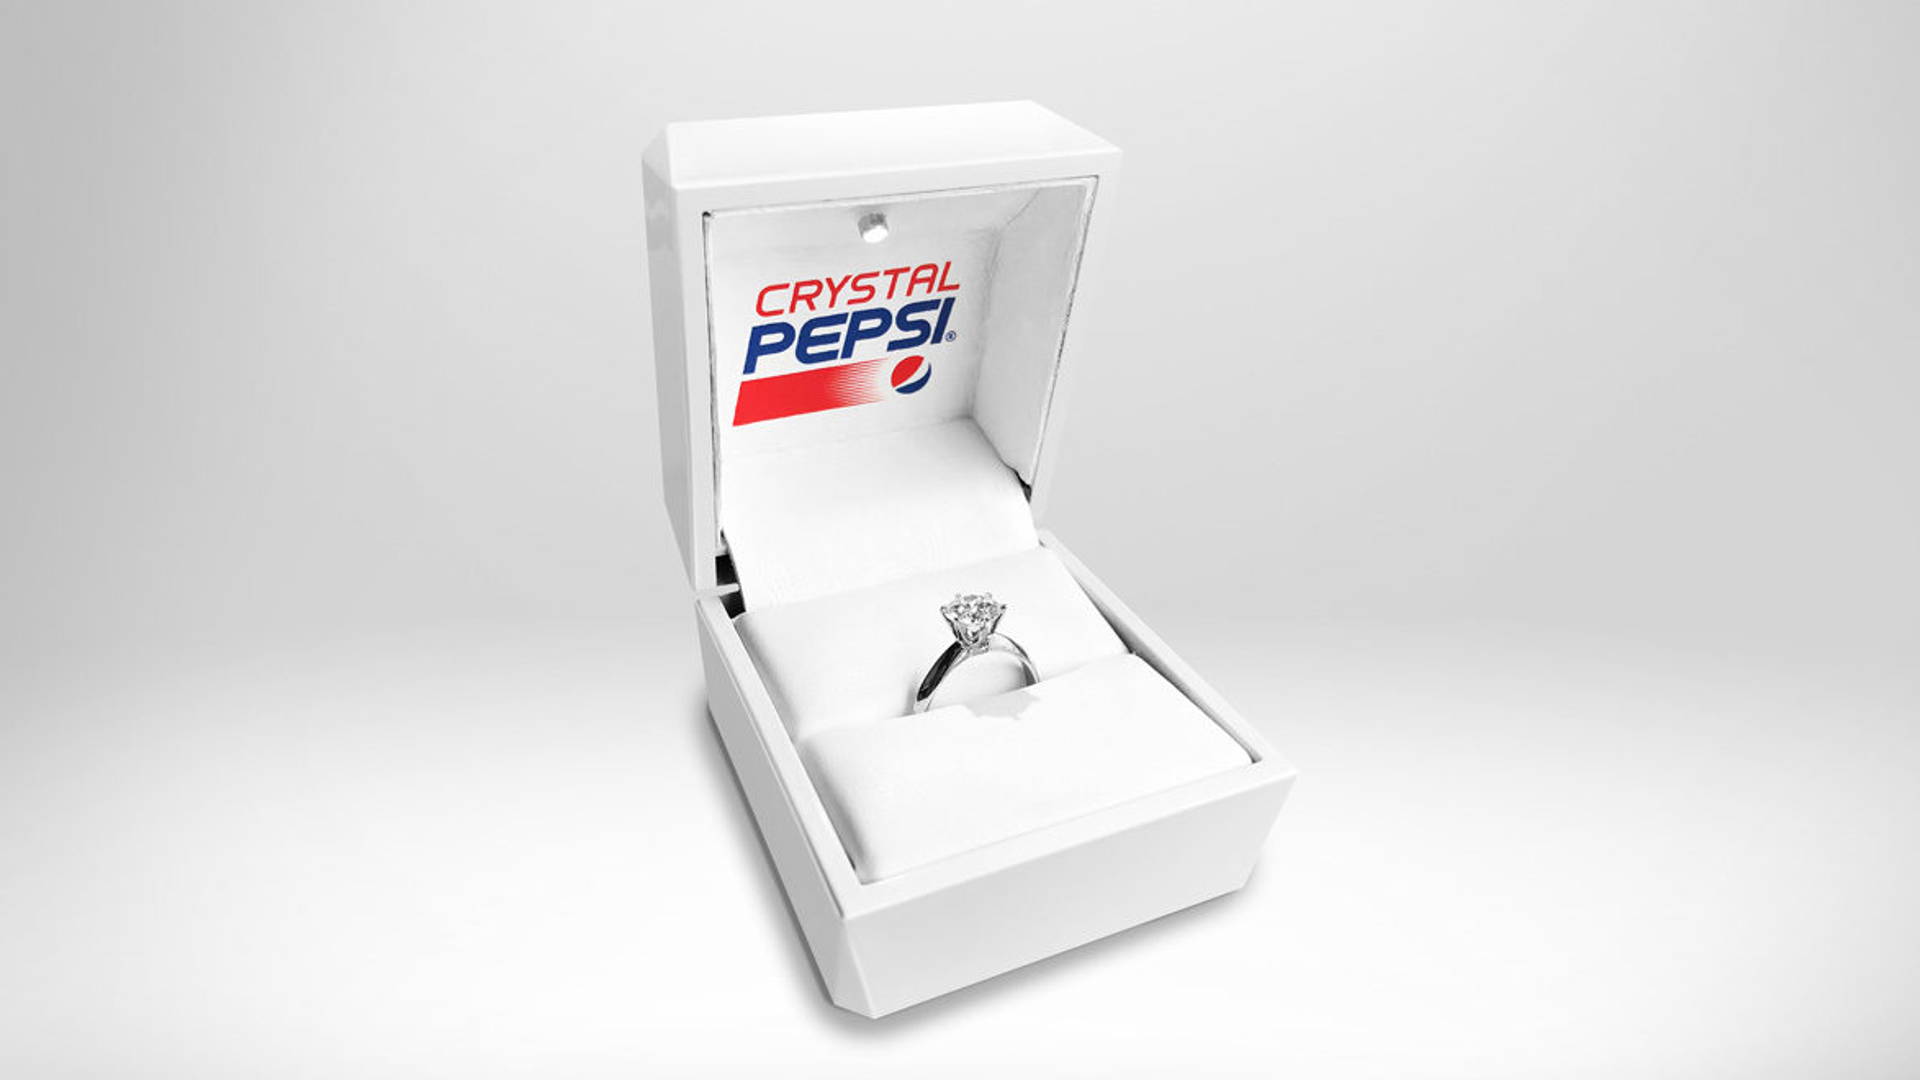 Featured image for This Valentine's Day, Pepsi Is Bringing The Ice With A Crystal Pepsi Engagement Ring